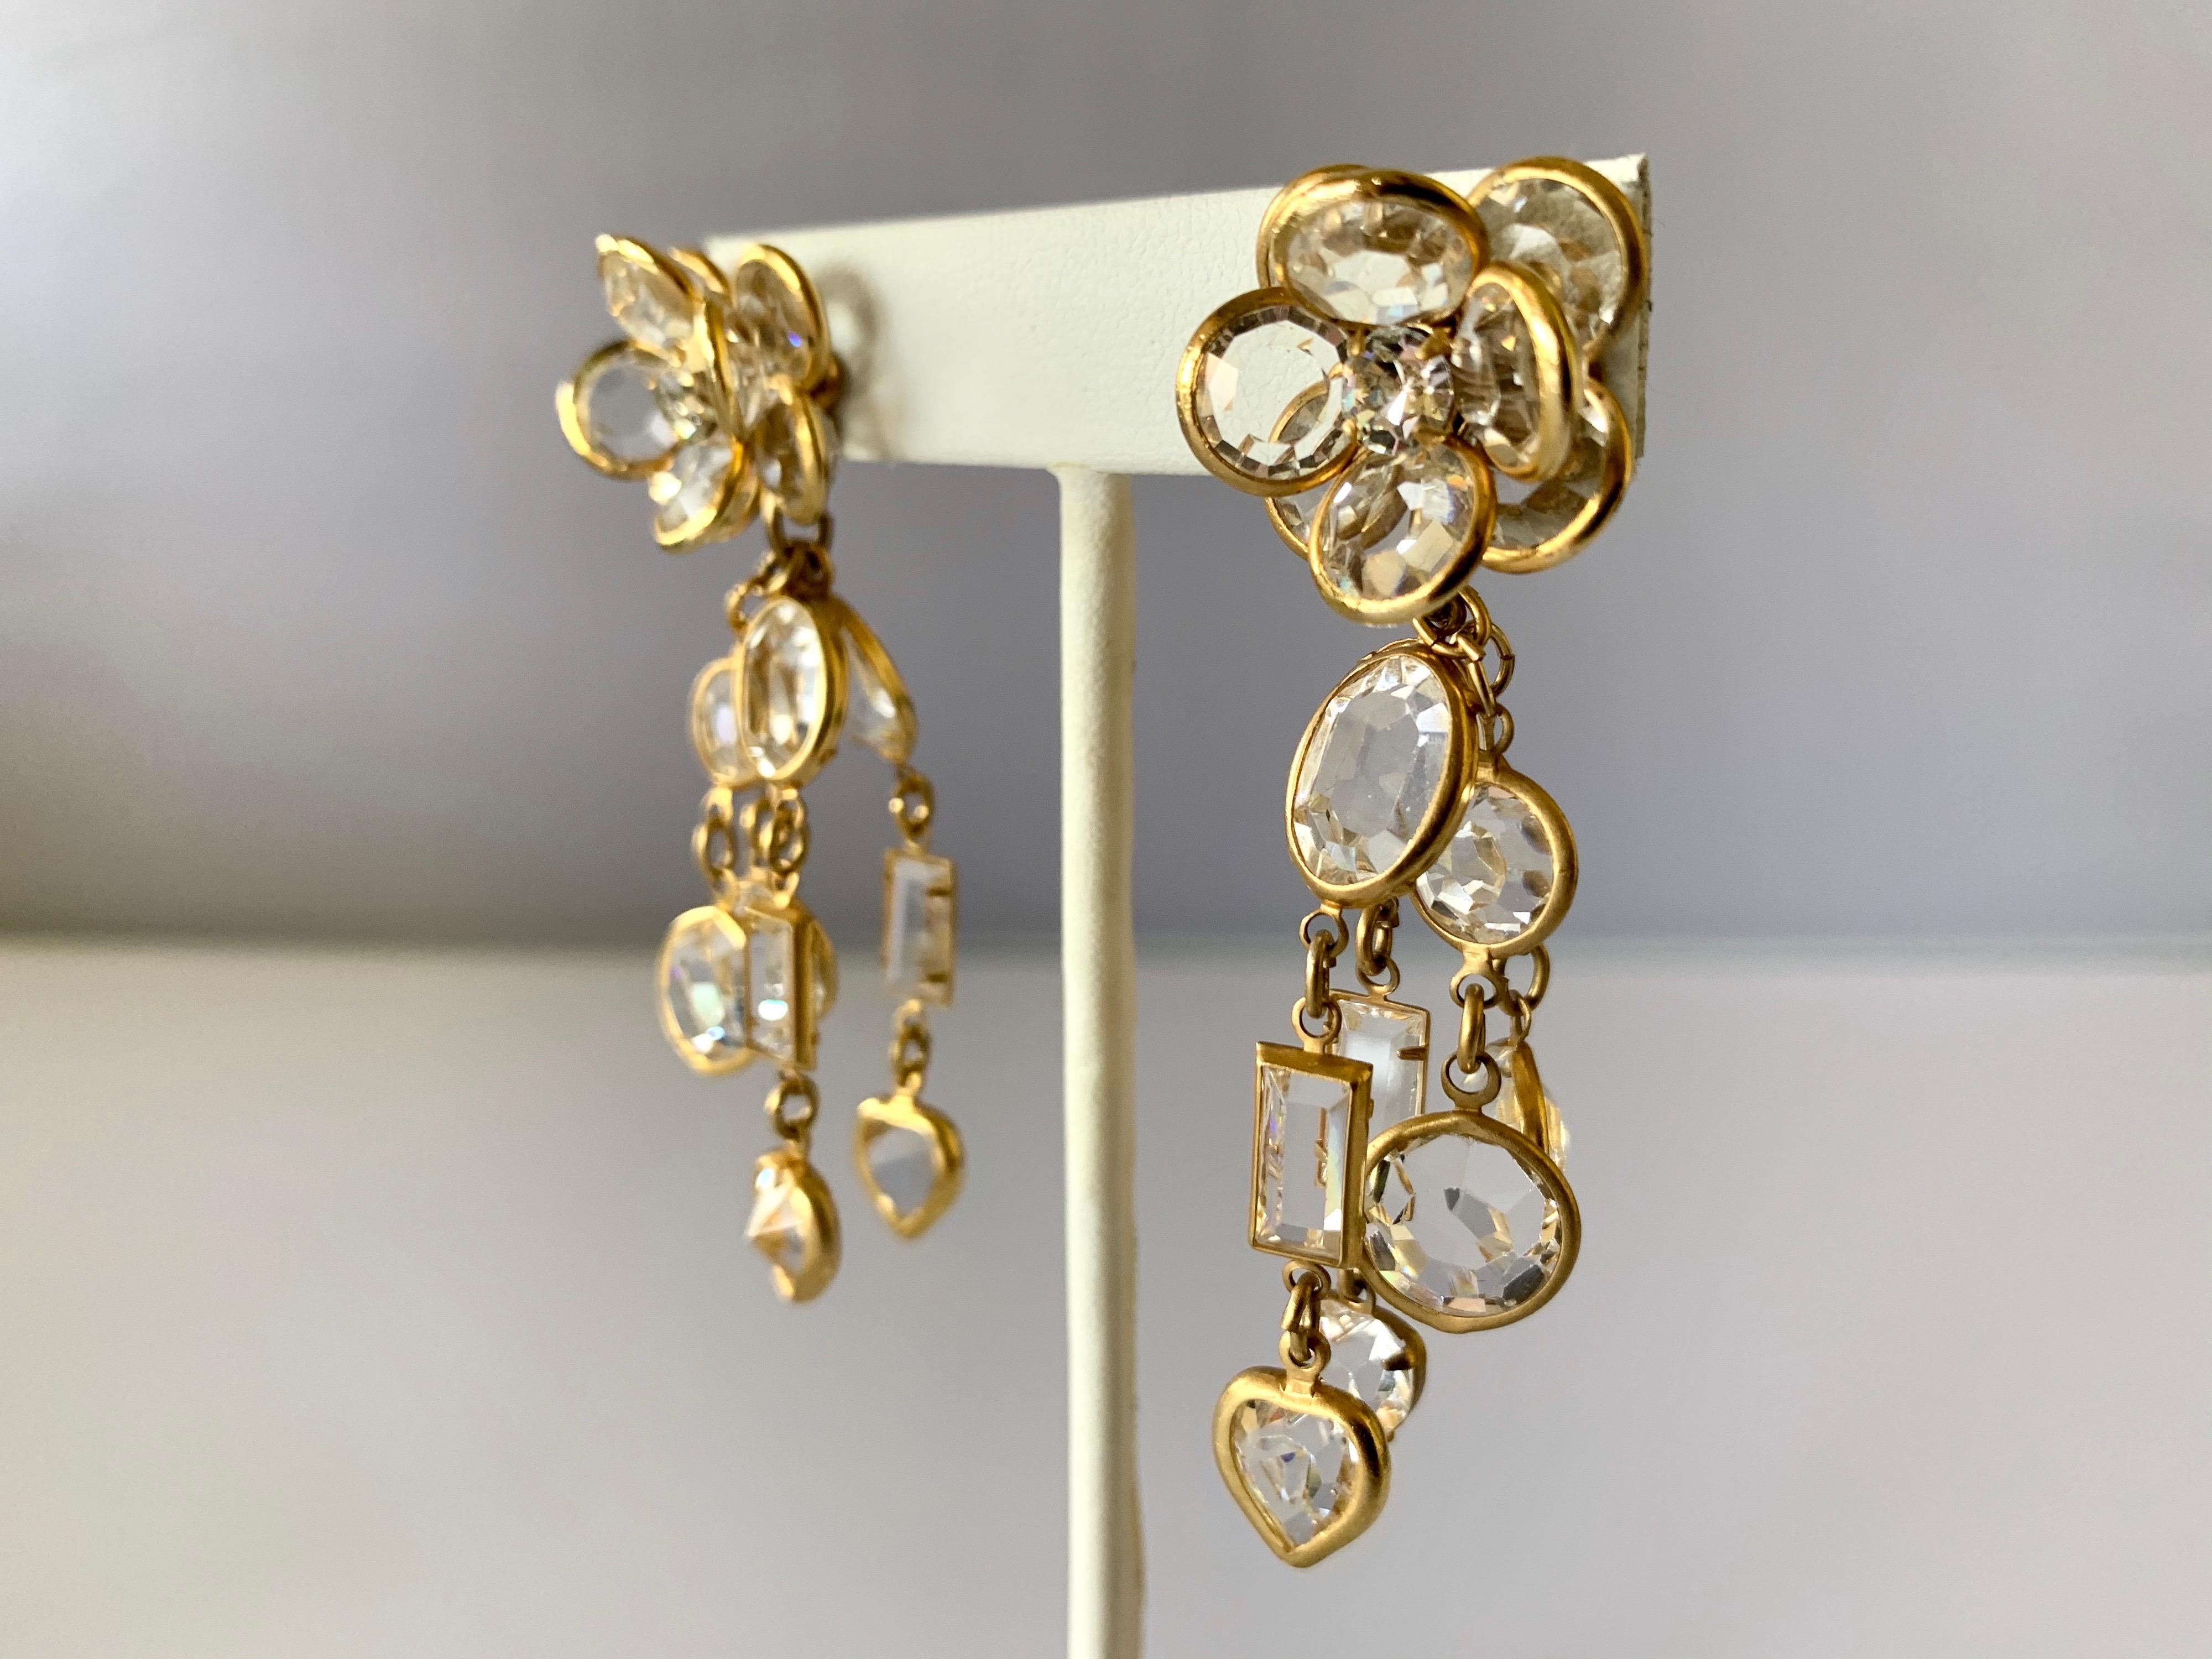 Vintage pierced statement earrings comprised out of gilt metal and clear faceted crystals. The earrings feature flowers with tassels that are accented with diamante rhinestones - made in France circa 1970.